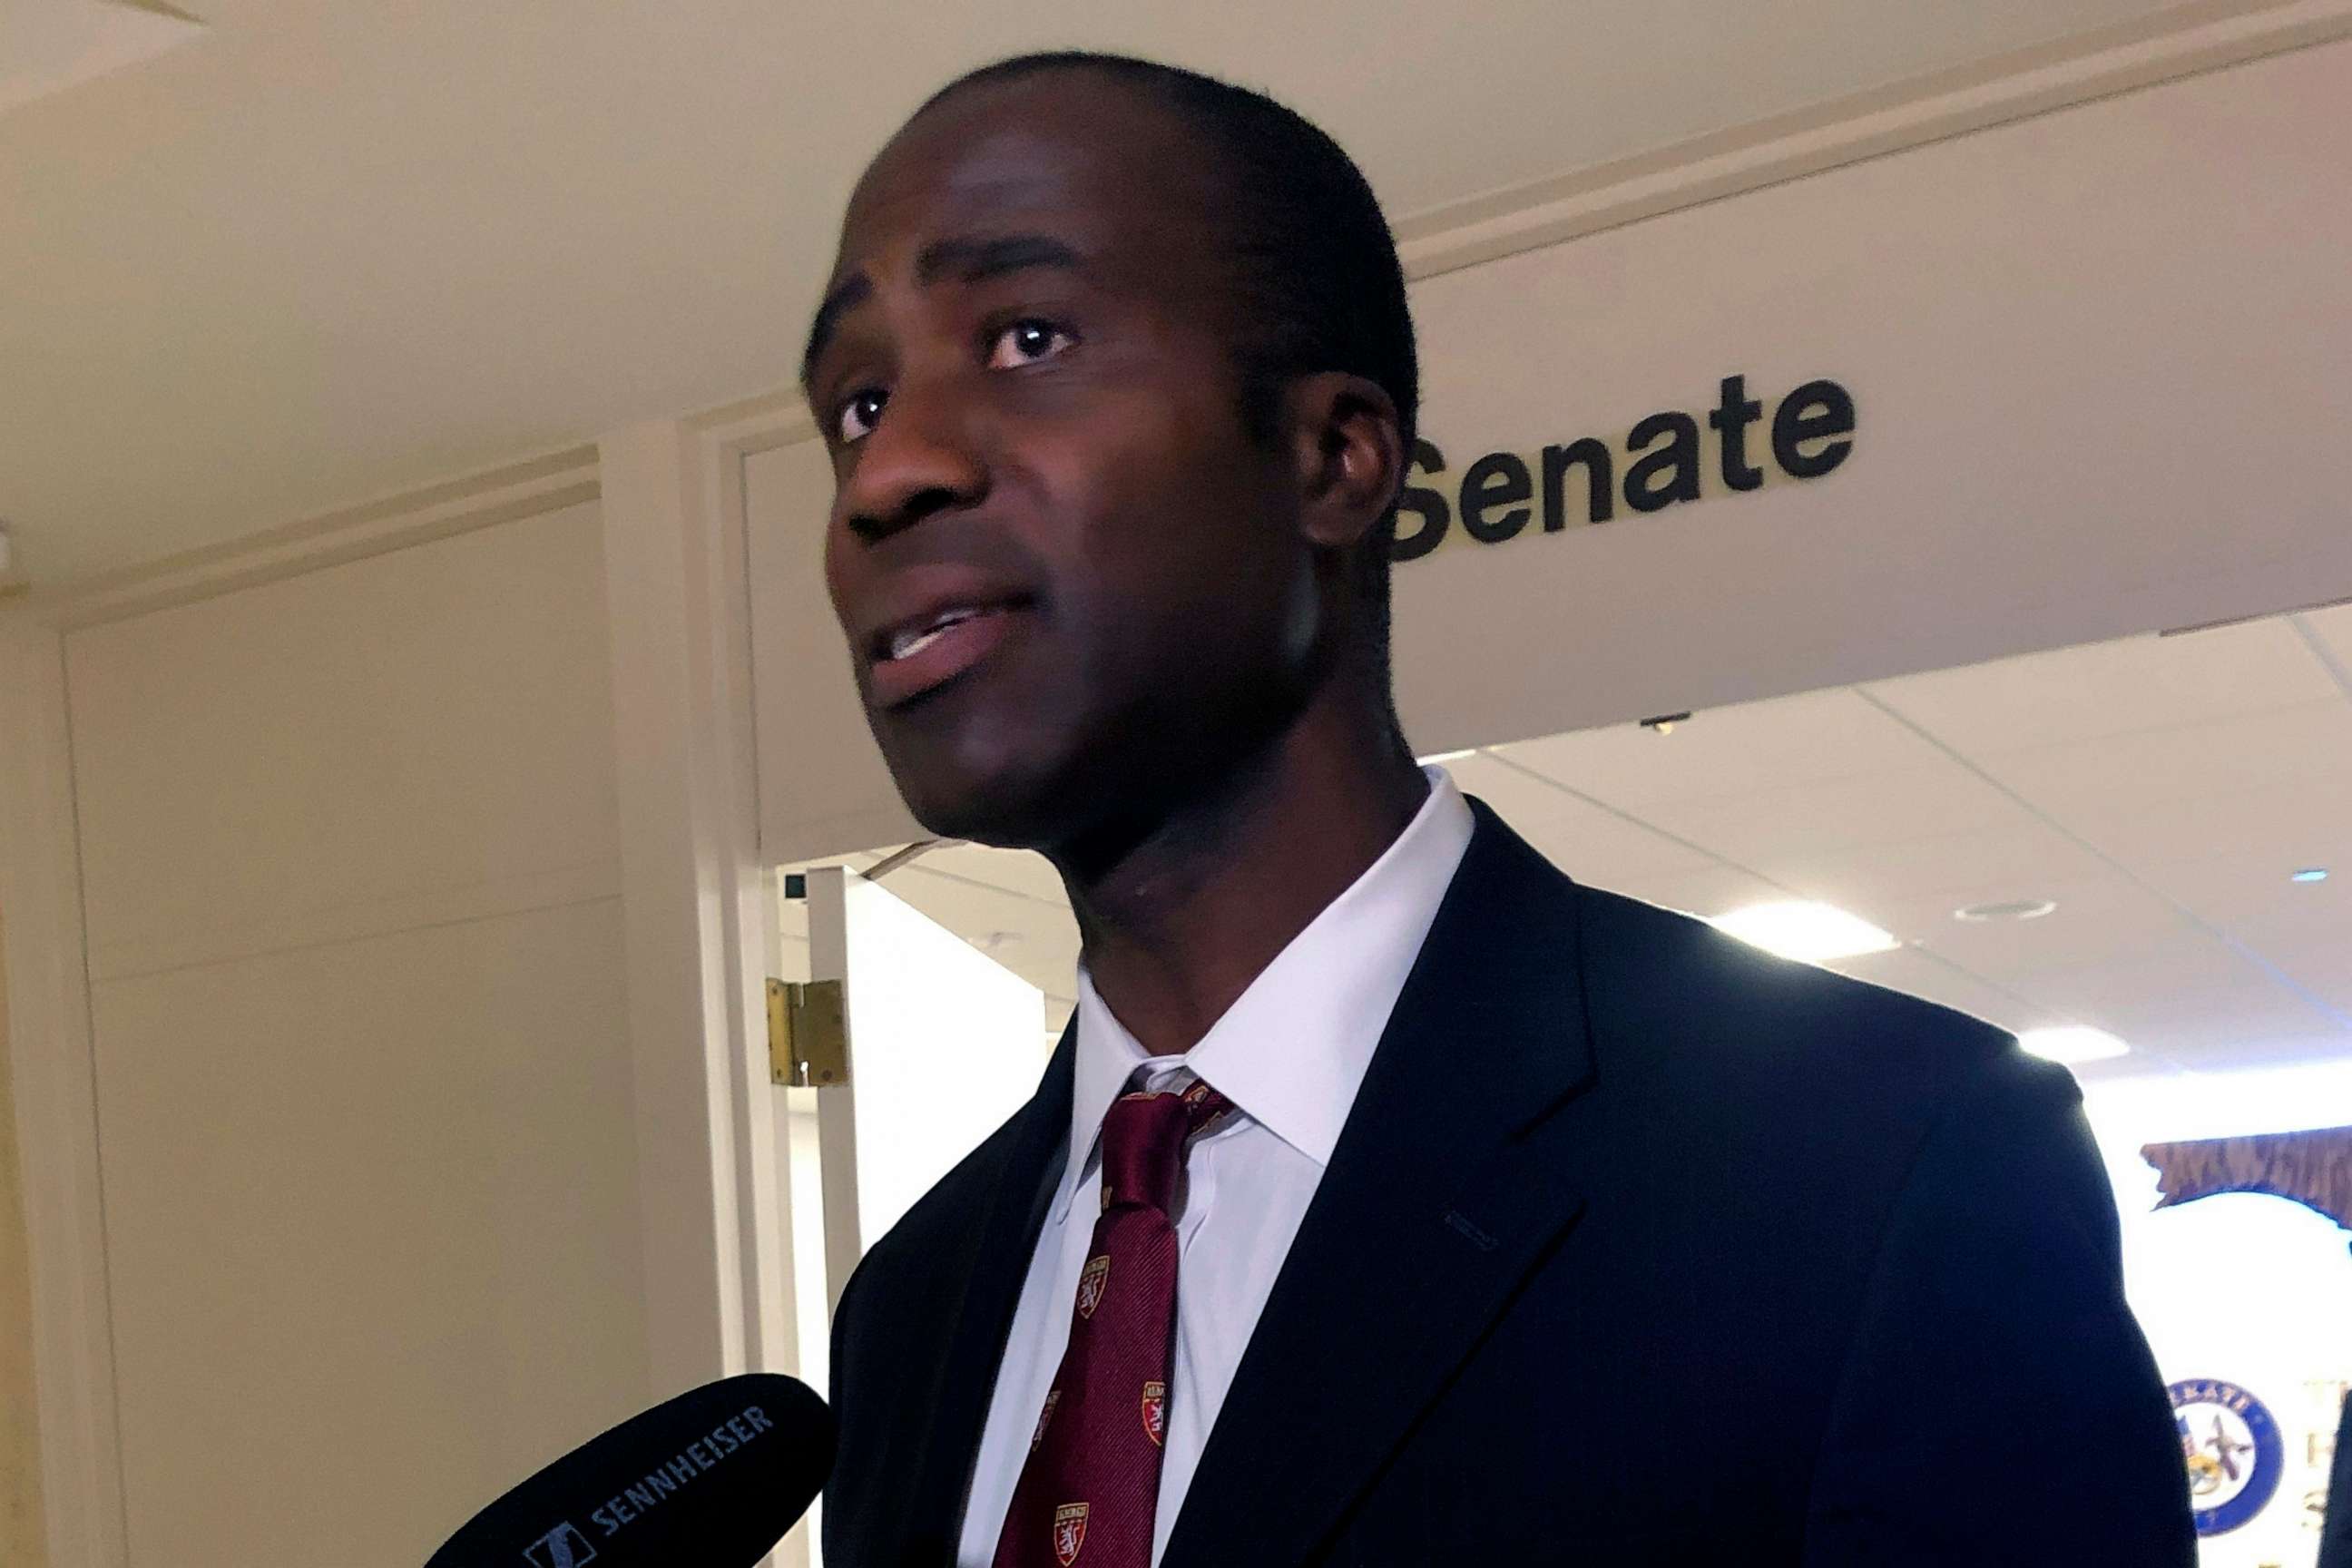 PHOTO: Dr. Joseph Ladapo speaks with reporters after the Florida Senate confirmed his appointment as the state's surgeon general on Feb. 23, 2022, in Tallahassee, Fla.